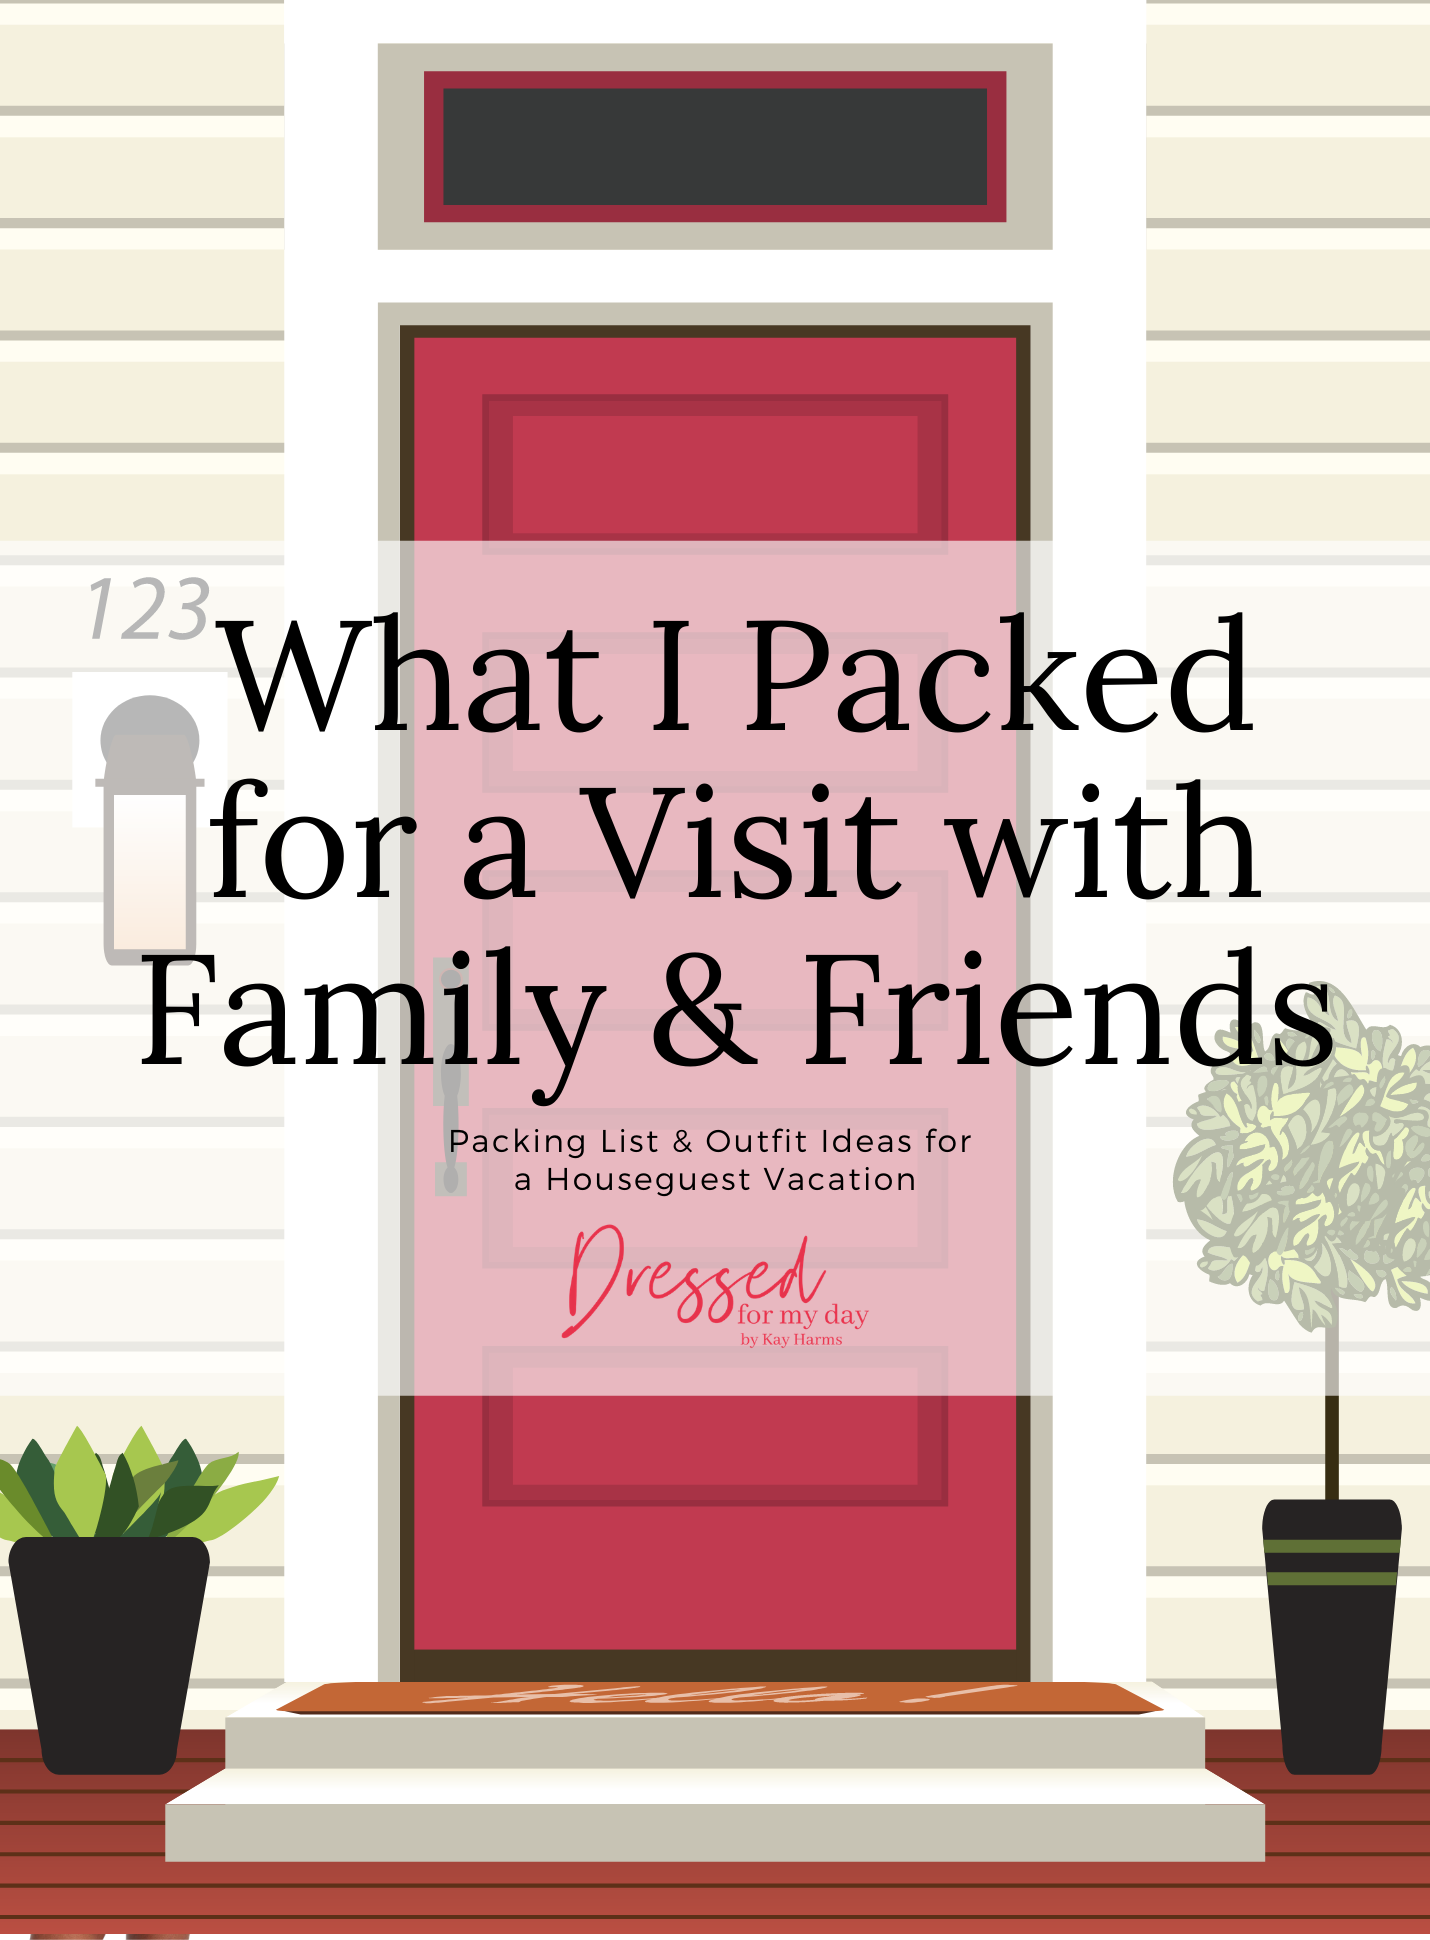 What I Packed for a Visit with Family & Friends 